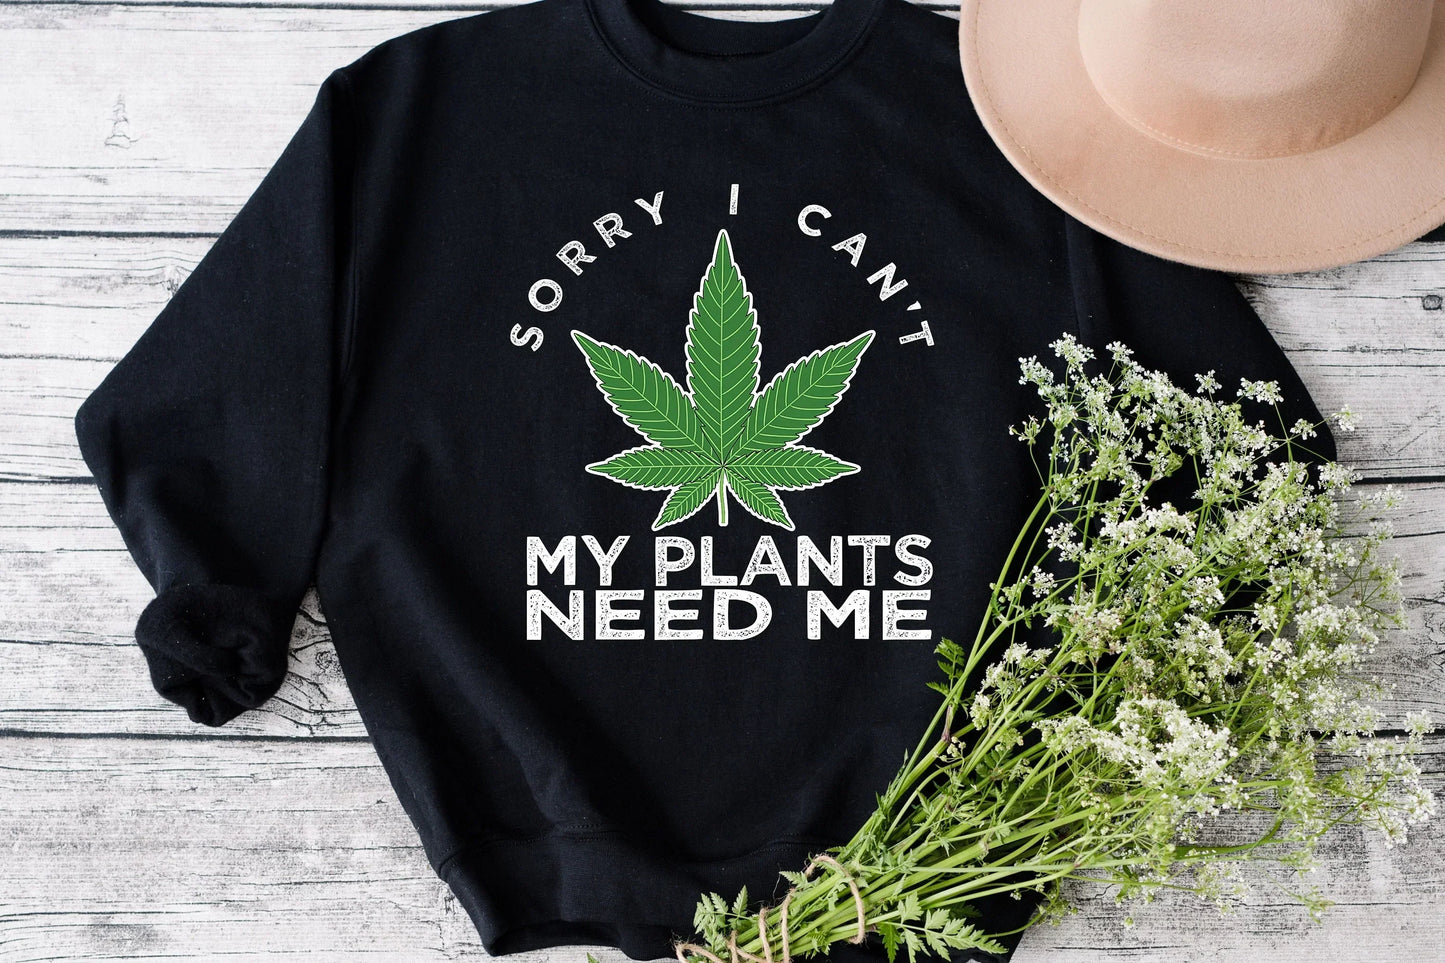 Hippie Clothes | Gift for Stoner Girls, Cannamoms, Crazy Plant Lady Pot Lovers, New Marijuana Smokers, Stoner Gift for Him/Her, Weed Gifts